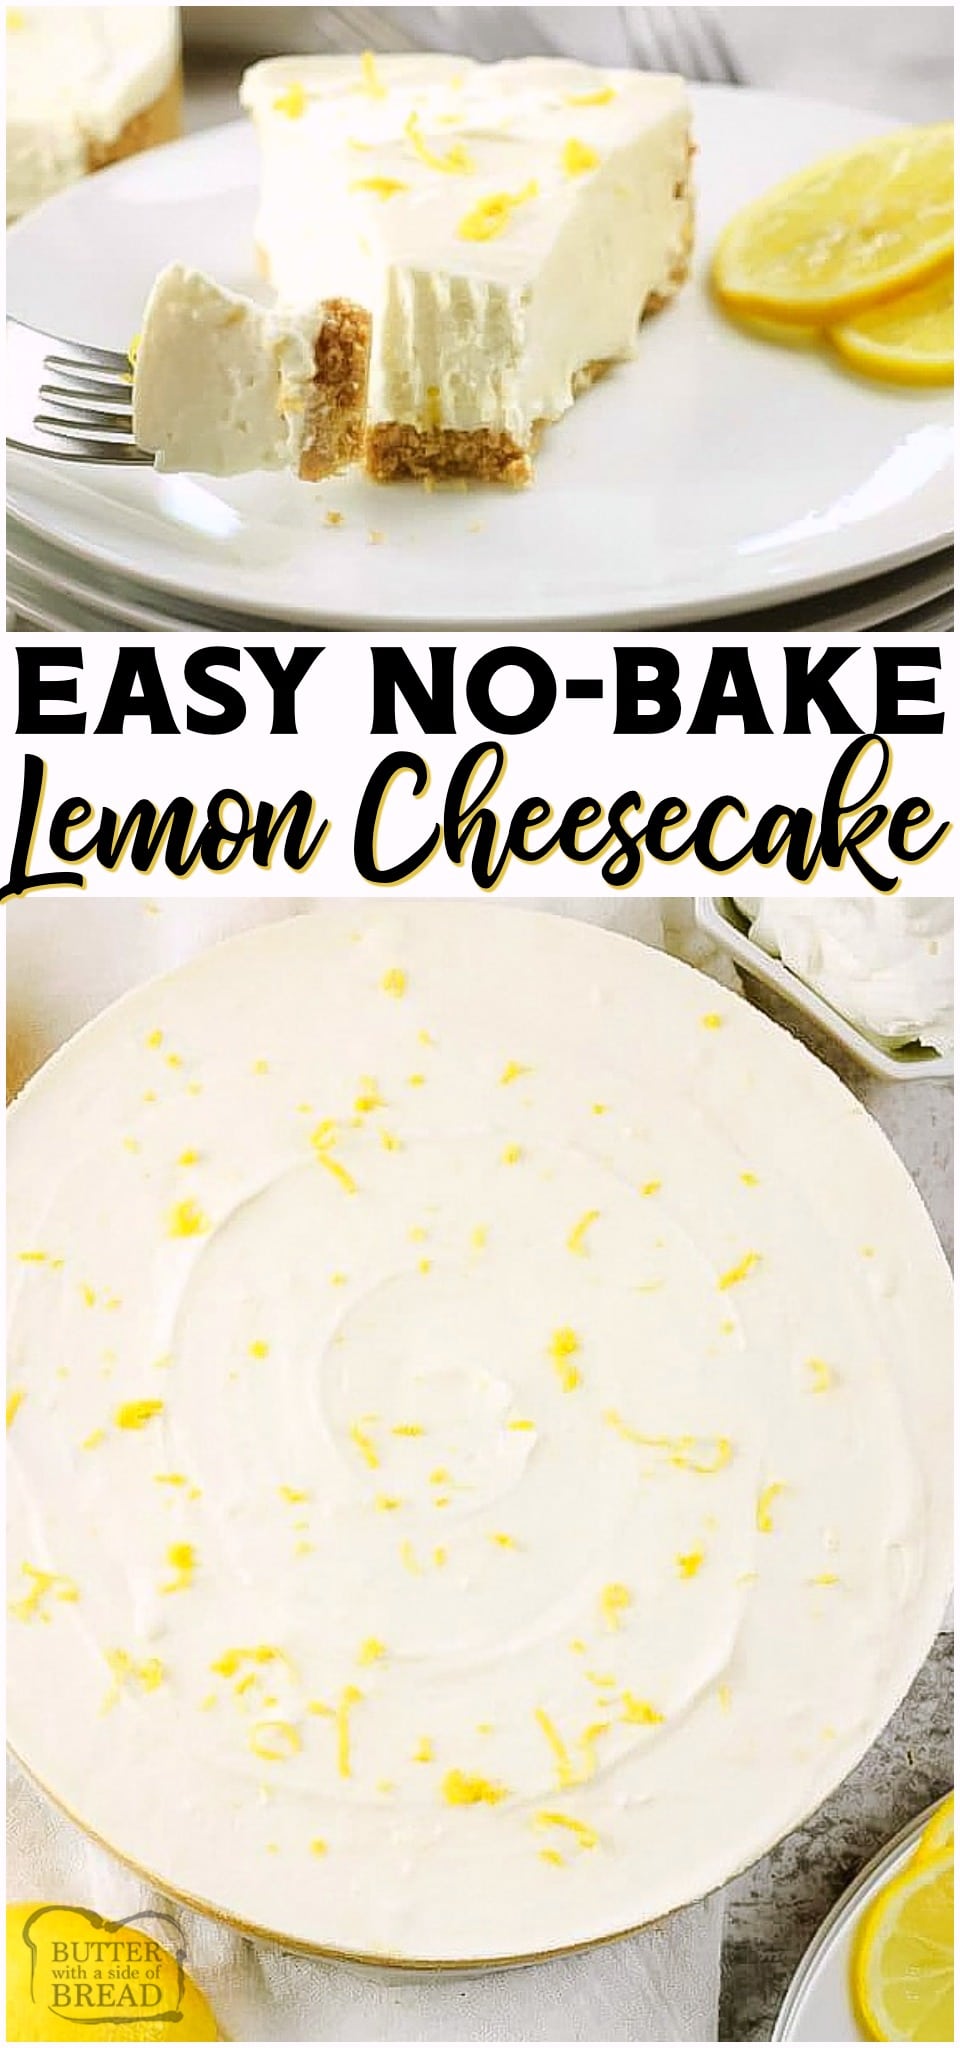 No Bake Lemon Cheesecake is a simple no bake dessert with only a few ingredients! Easy Lemon Cheesecake recipe with bright, fresh lemon flavor in a creamy no-bake cheesecake. 